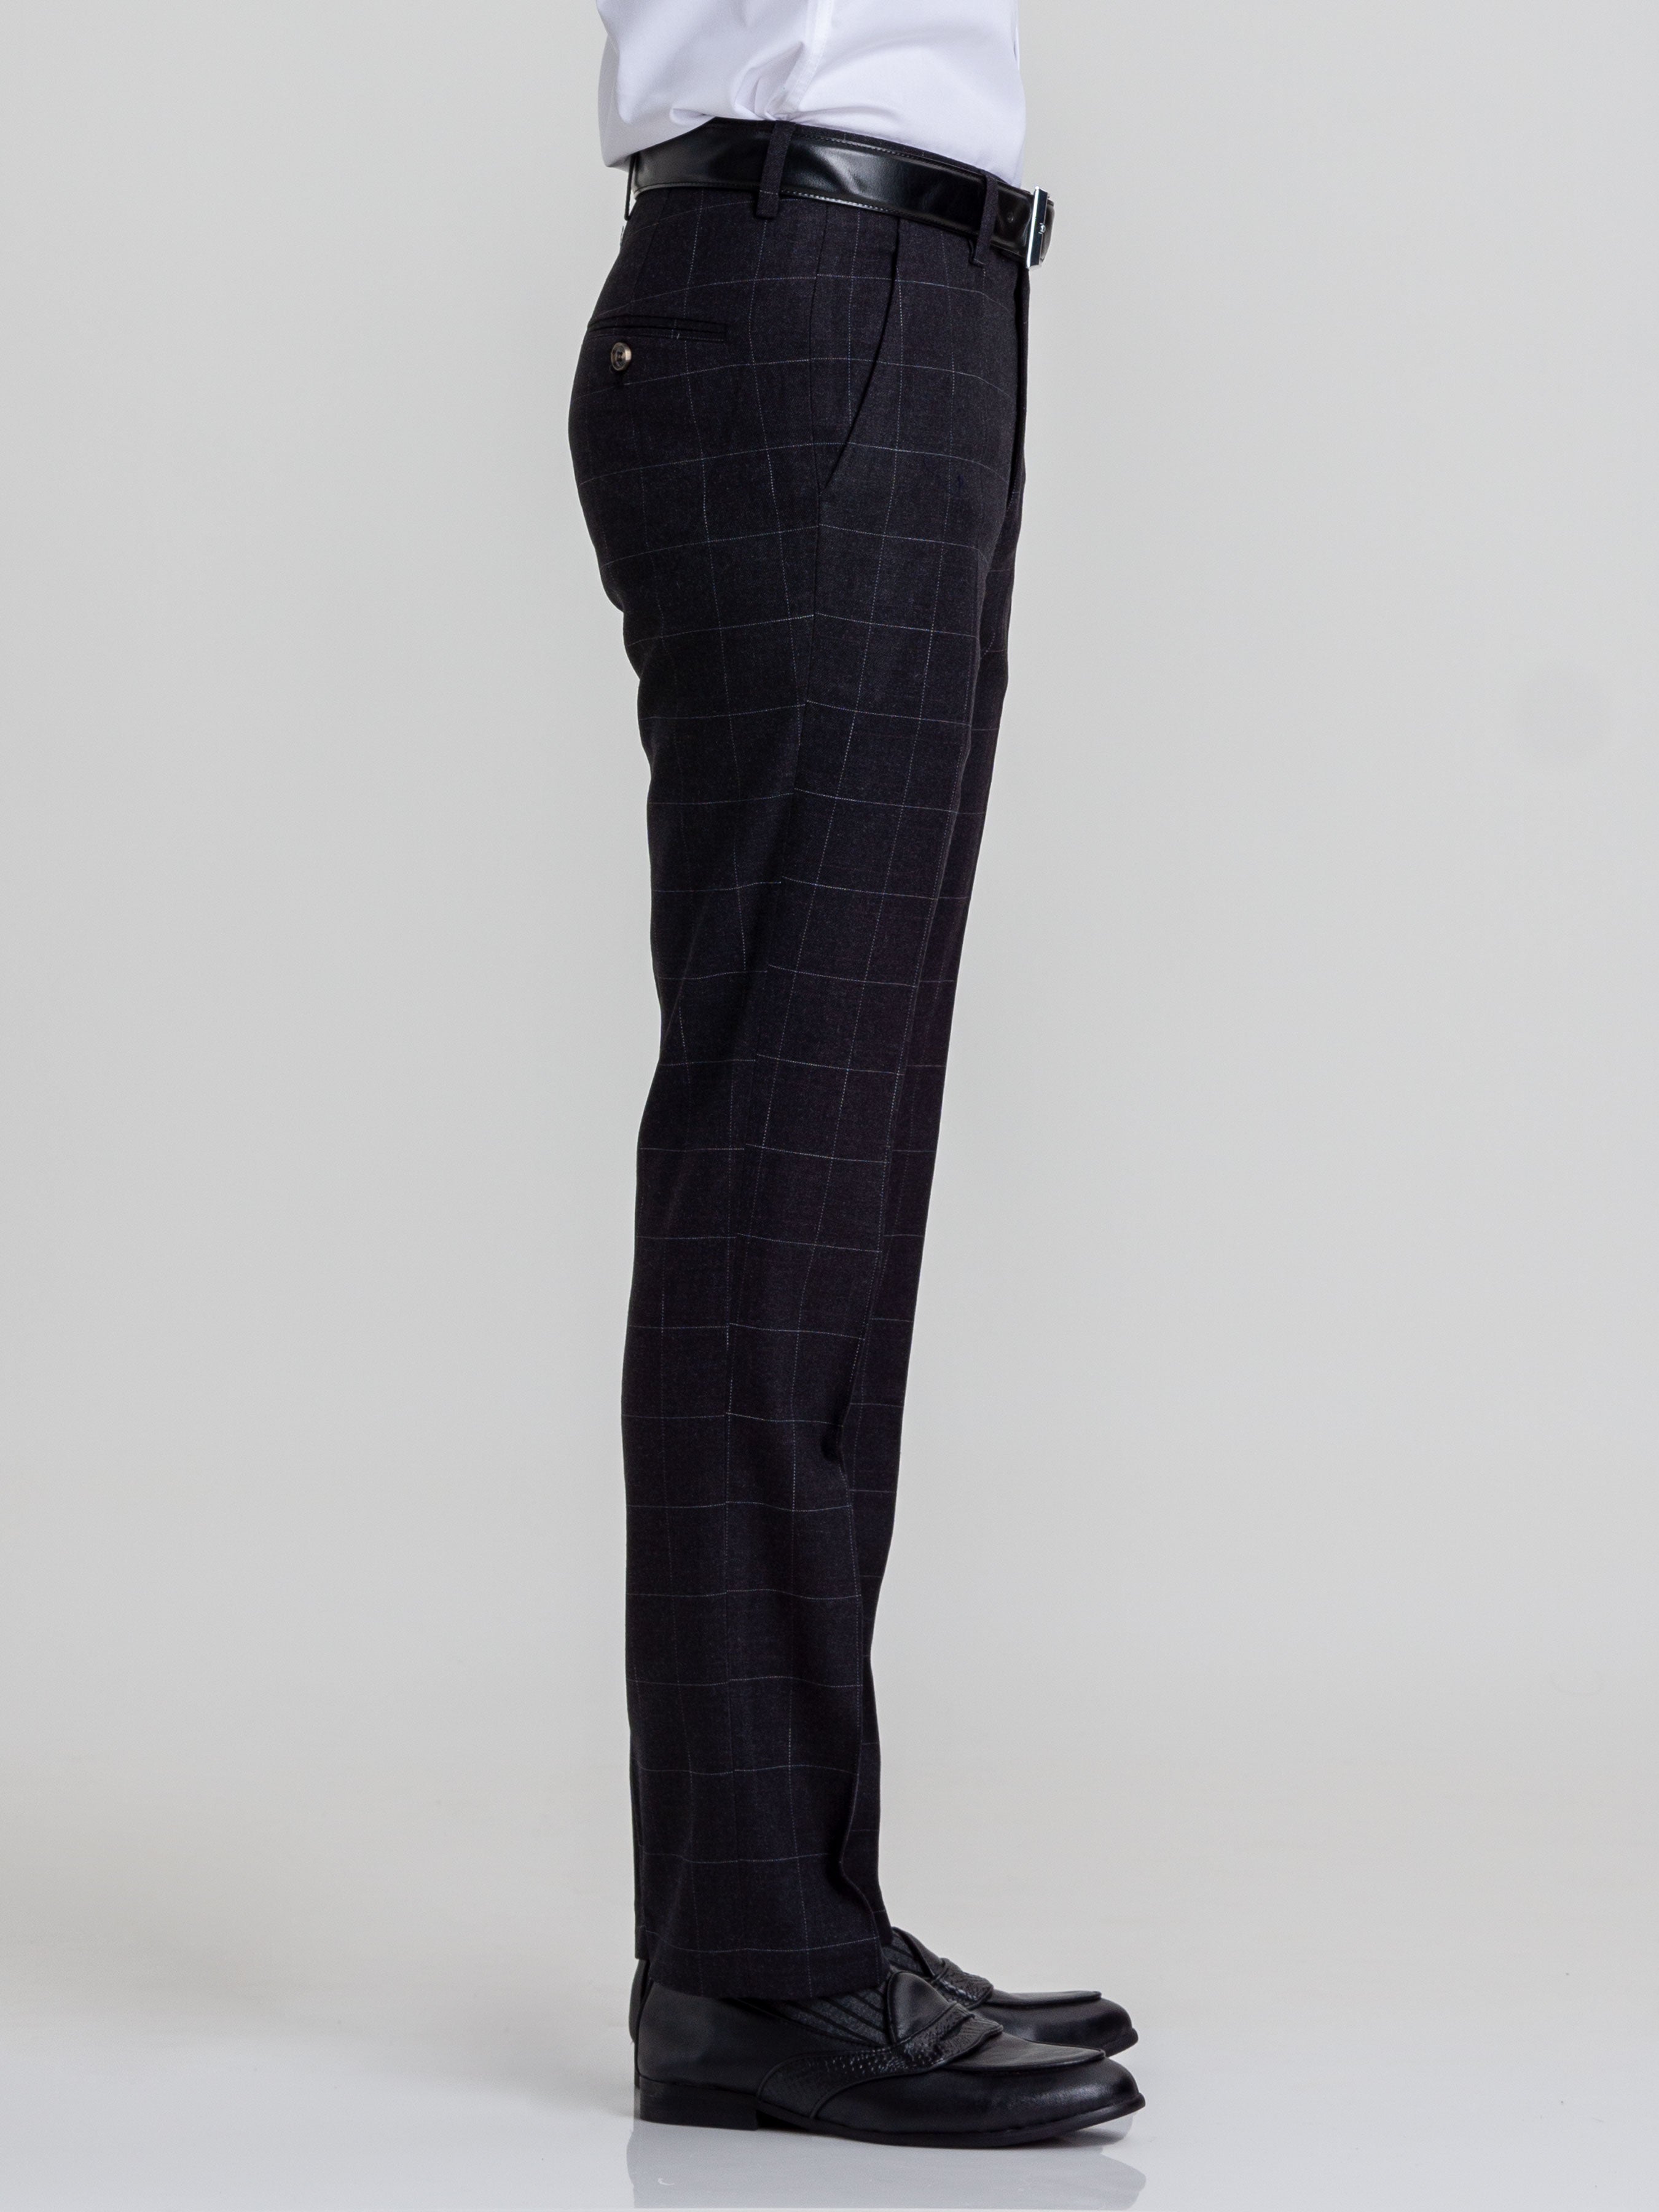 Trousers With Belt Loop -  Black Charcoal Windowpane Checkered (Stretchable) - Zeve Shoes